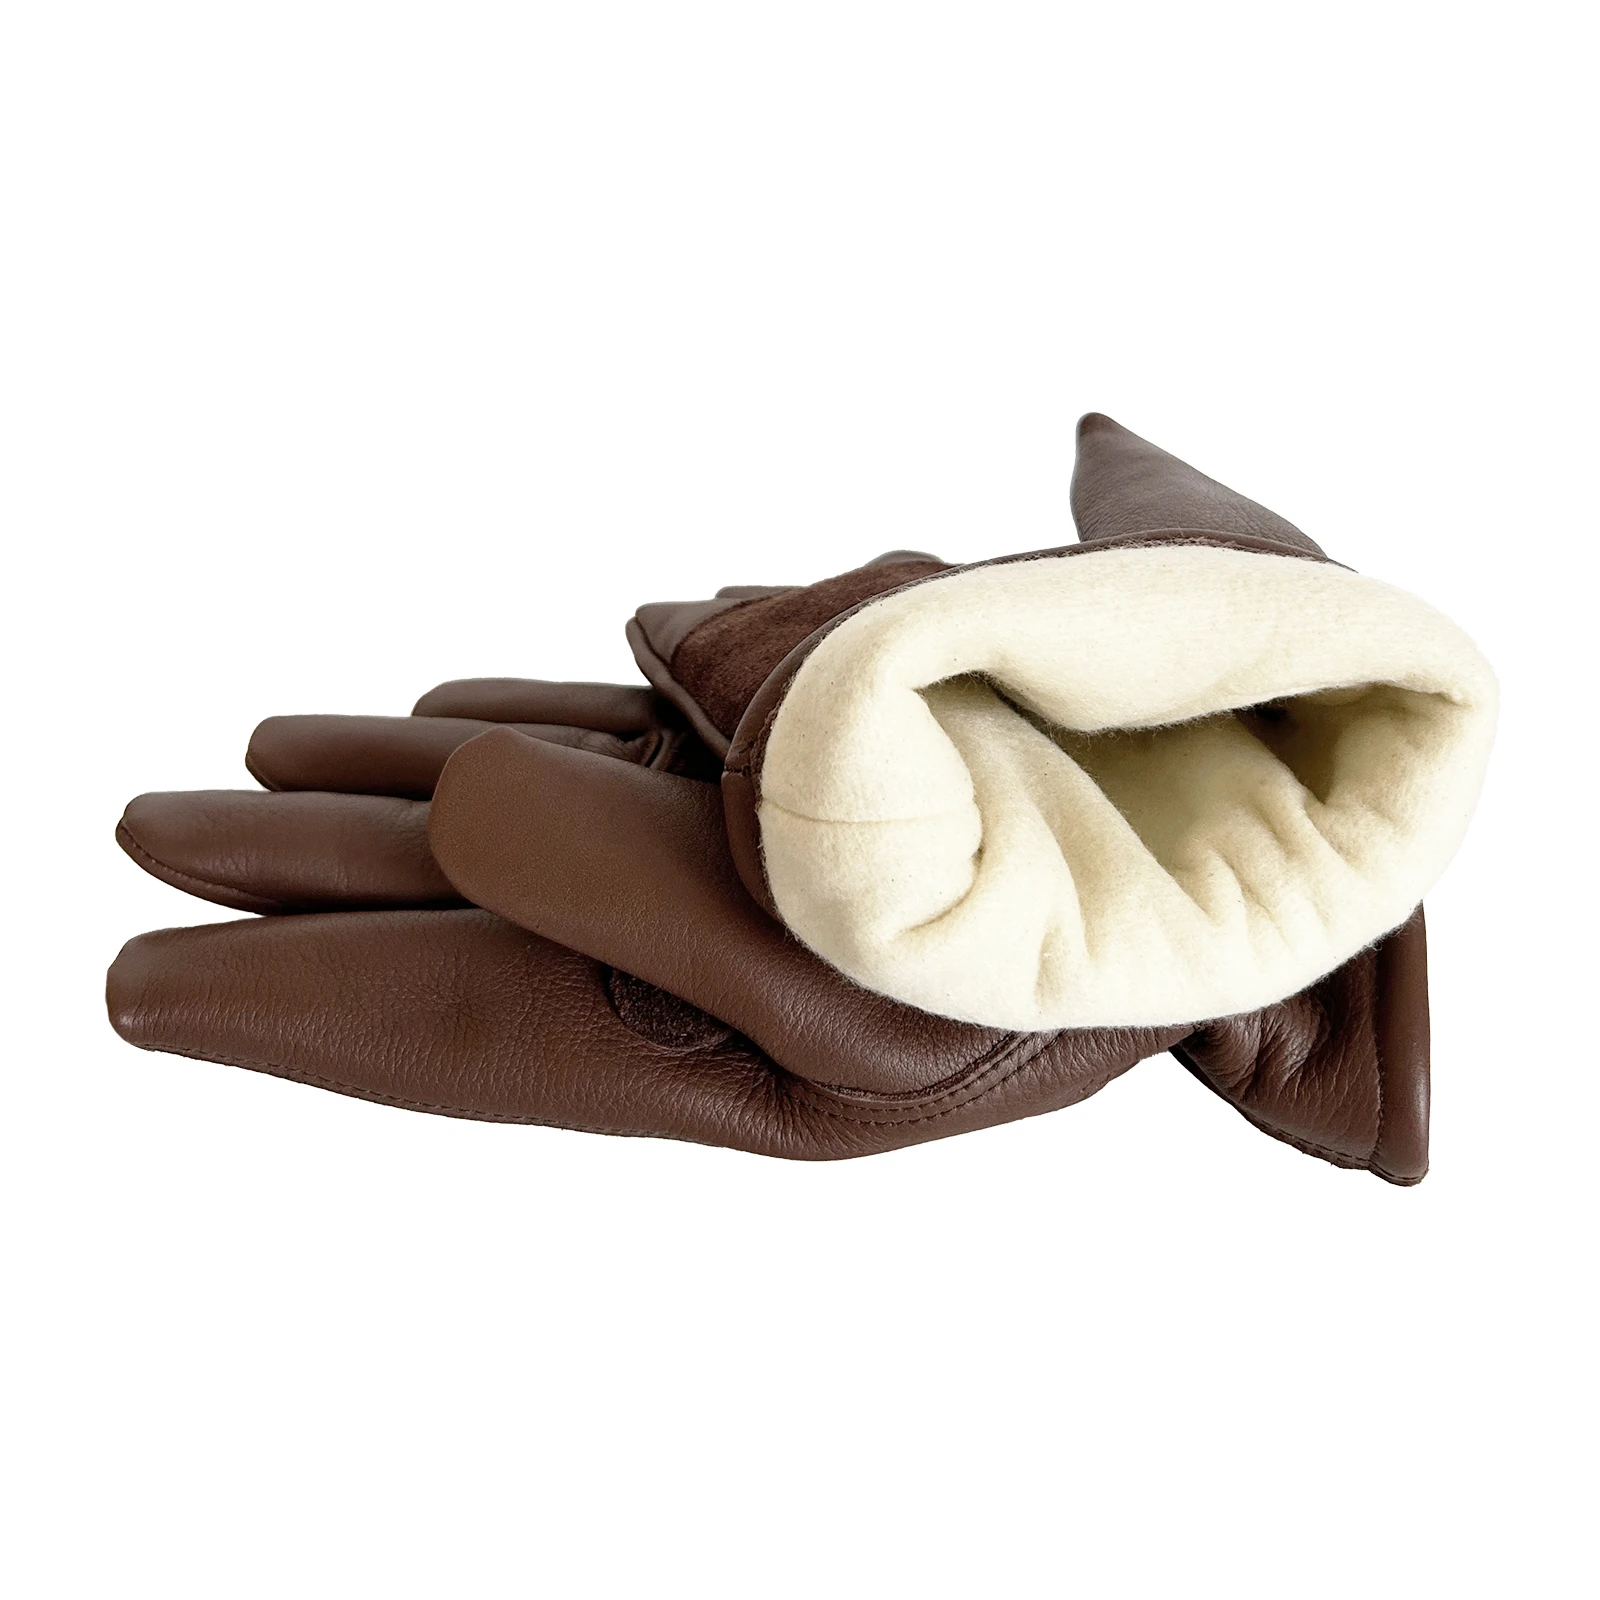 

Brown Winter Work Gloves Cowhide Leather Thermal Motorcycle Glove Cold Weather Cotton Lining freezer Working Glove